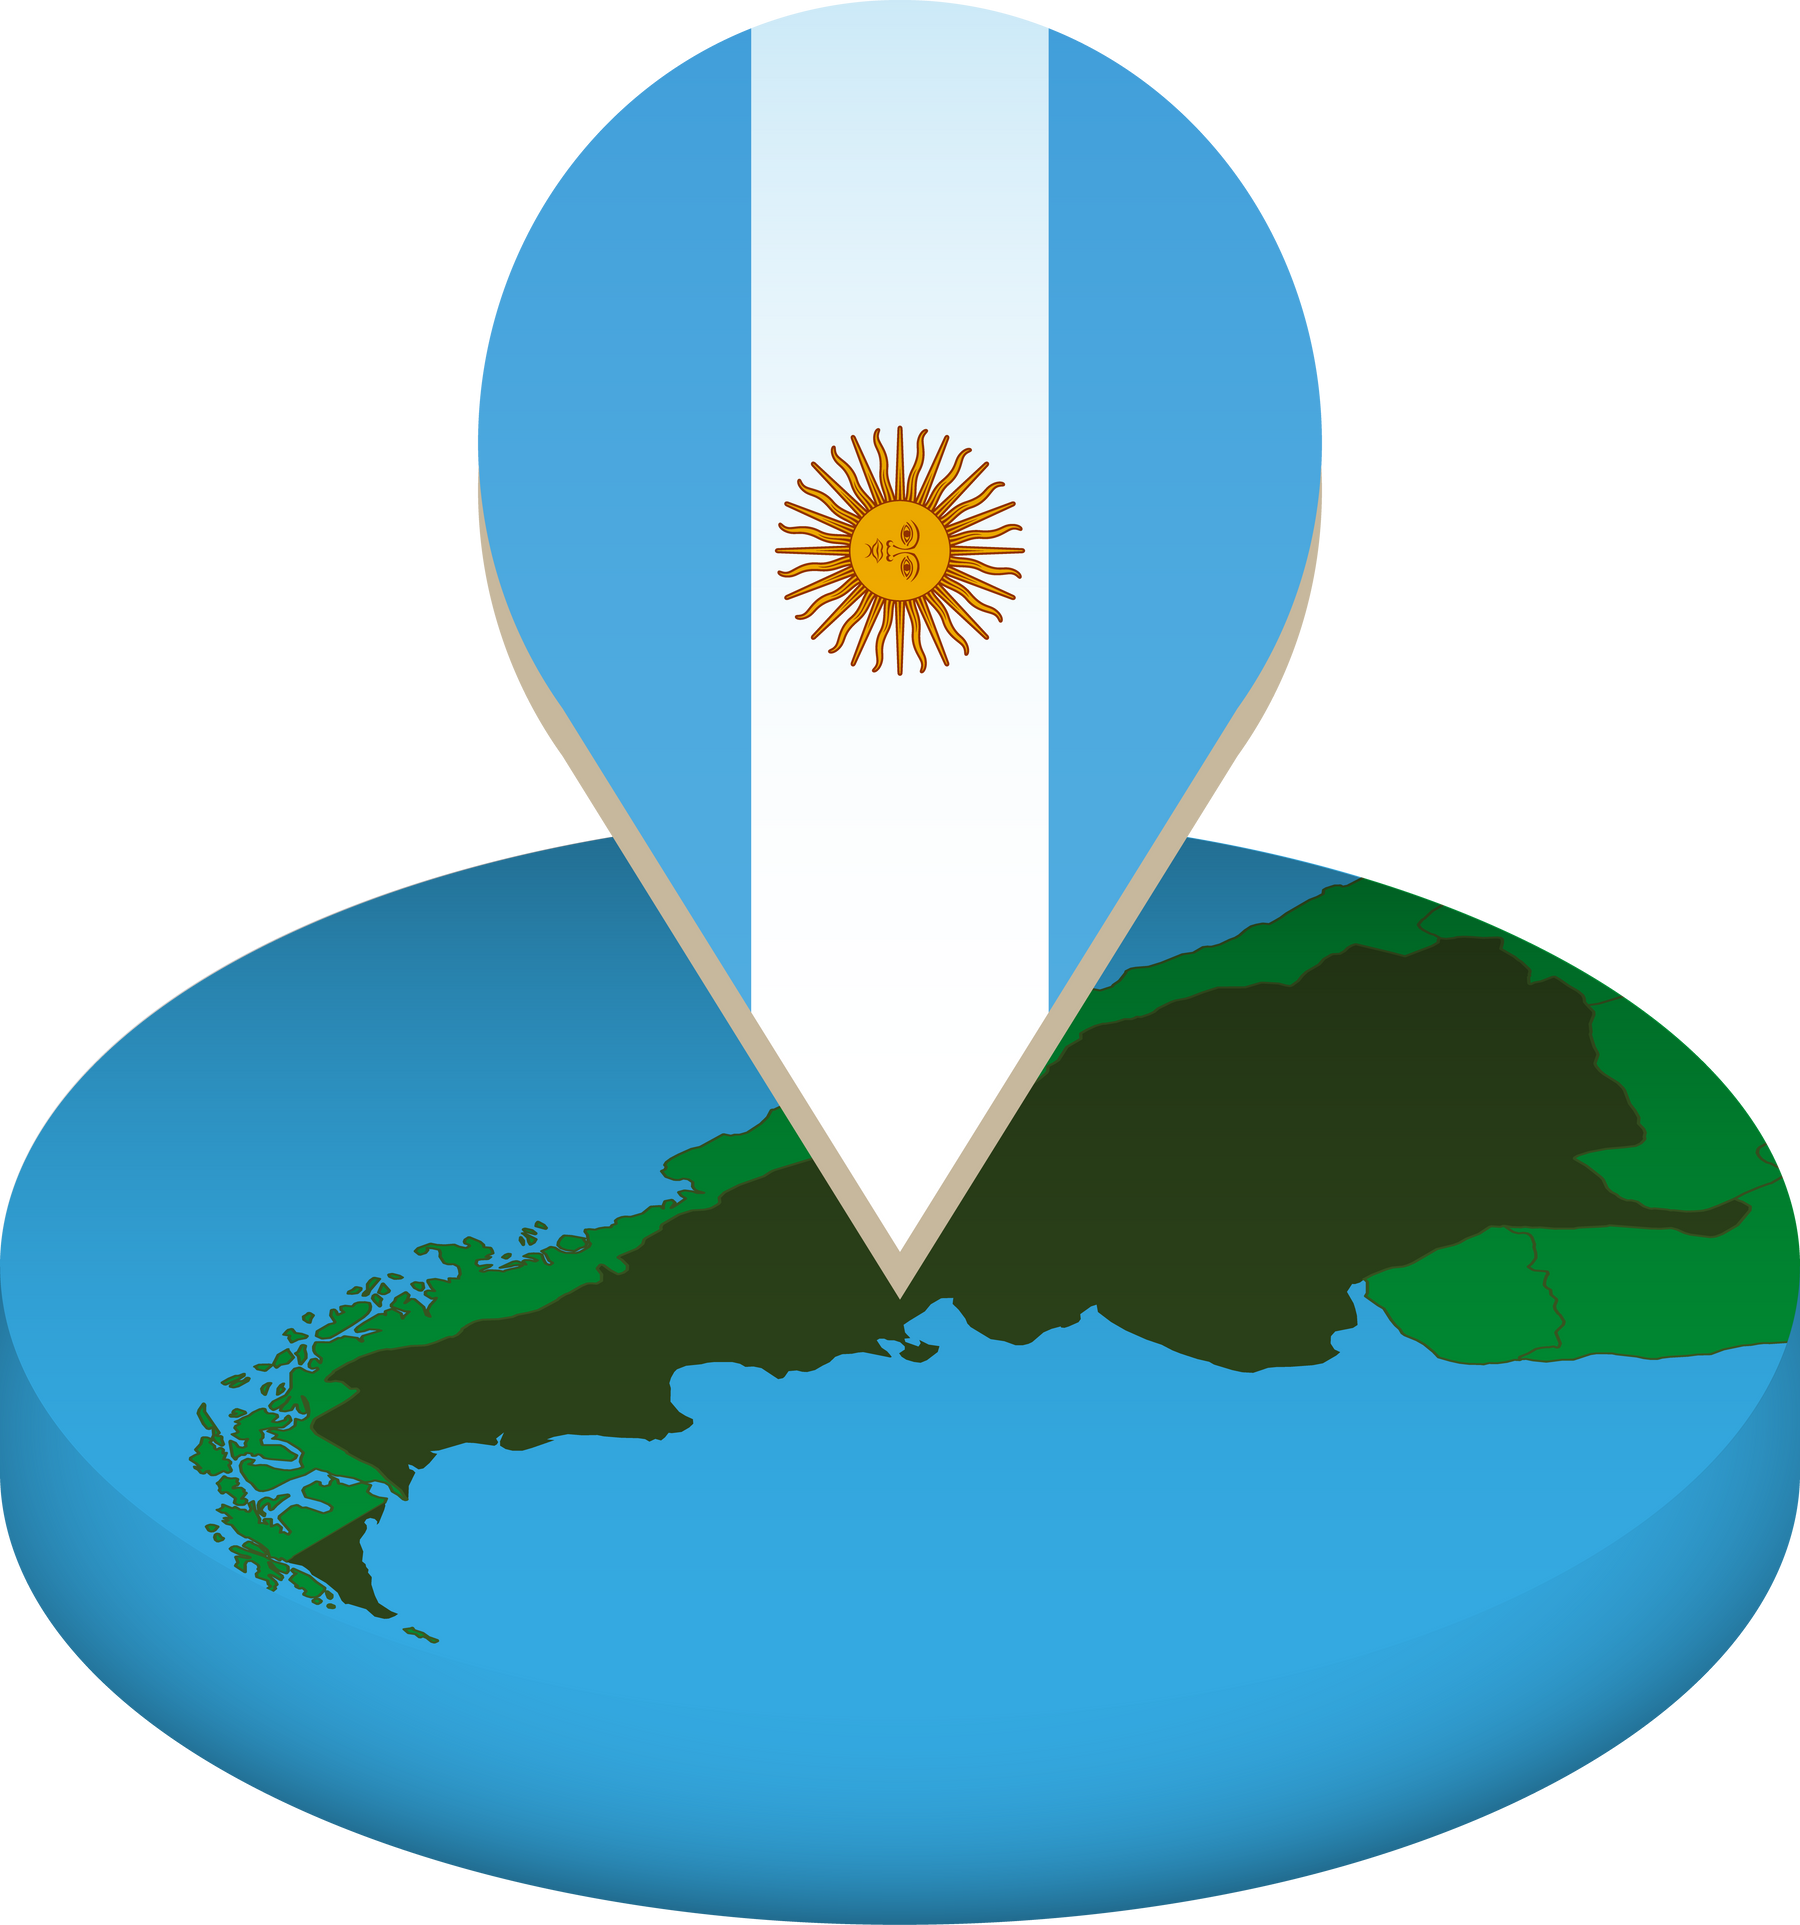 Isometric round map of Argentina with flag.